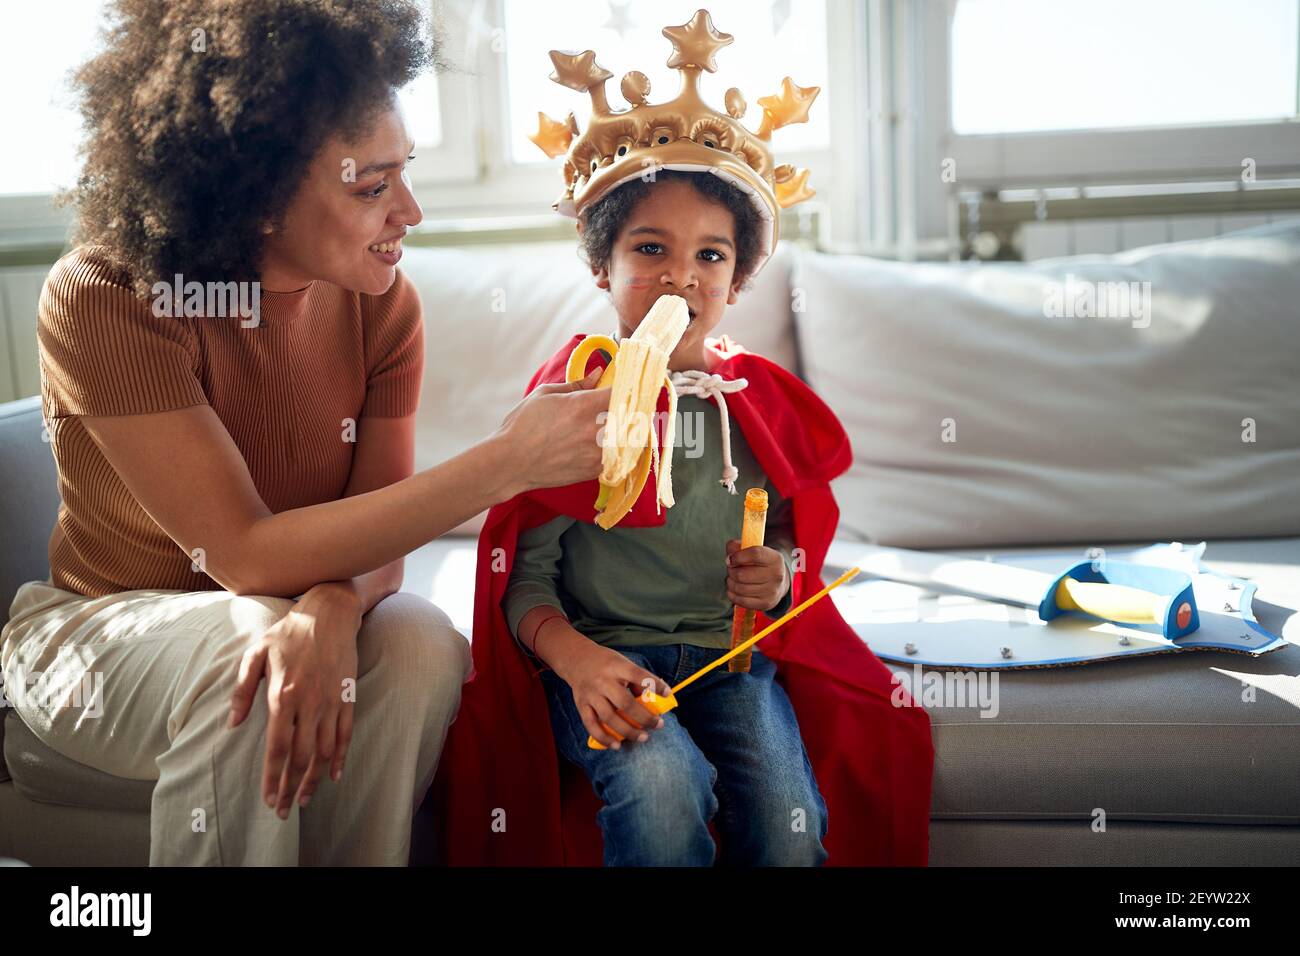 A little boy enjoying a banana while playing with his Mom in a relaxed atmosphere at home. Family, together, love, playtime Stock Photo